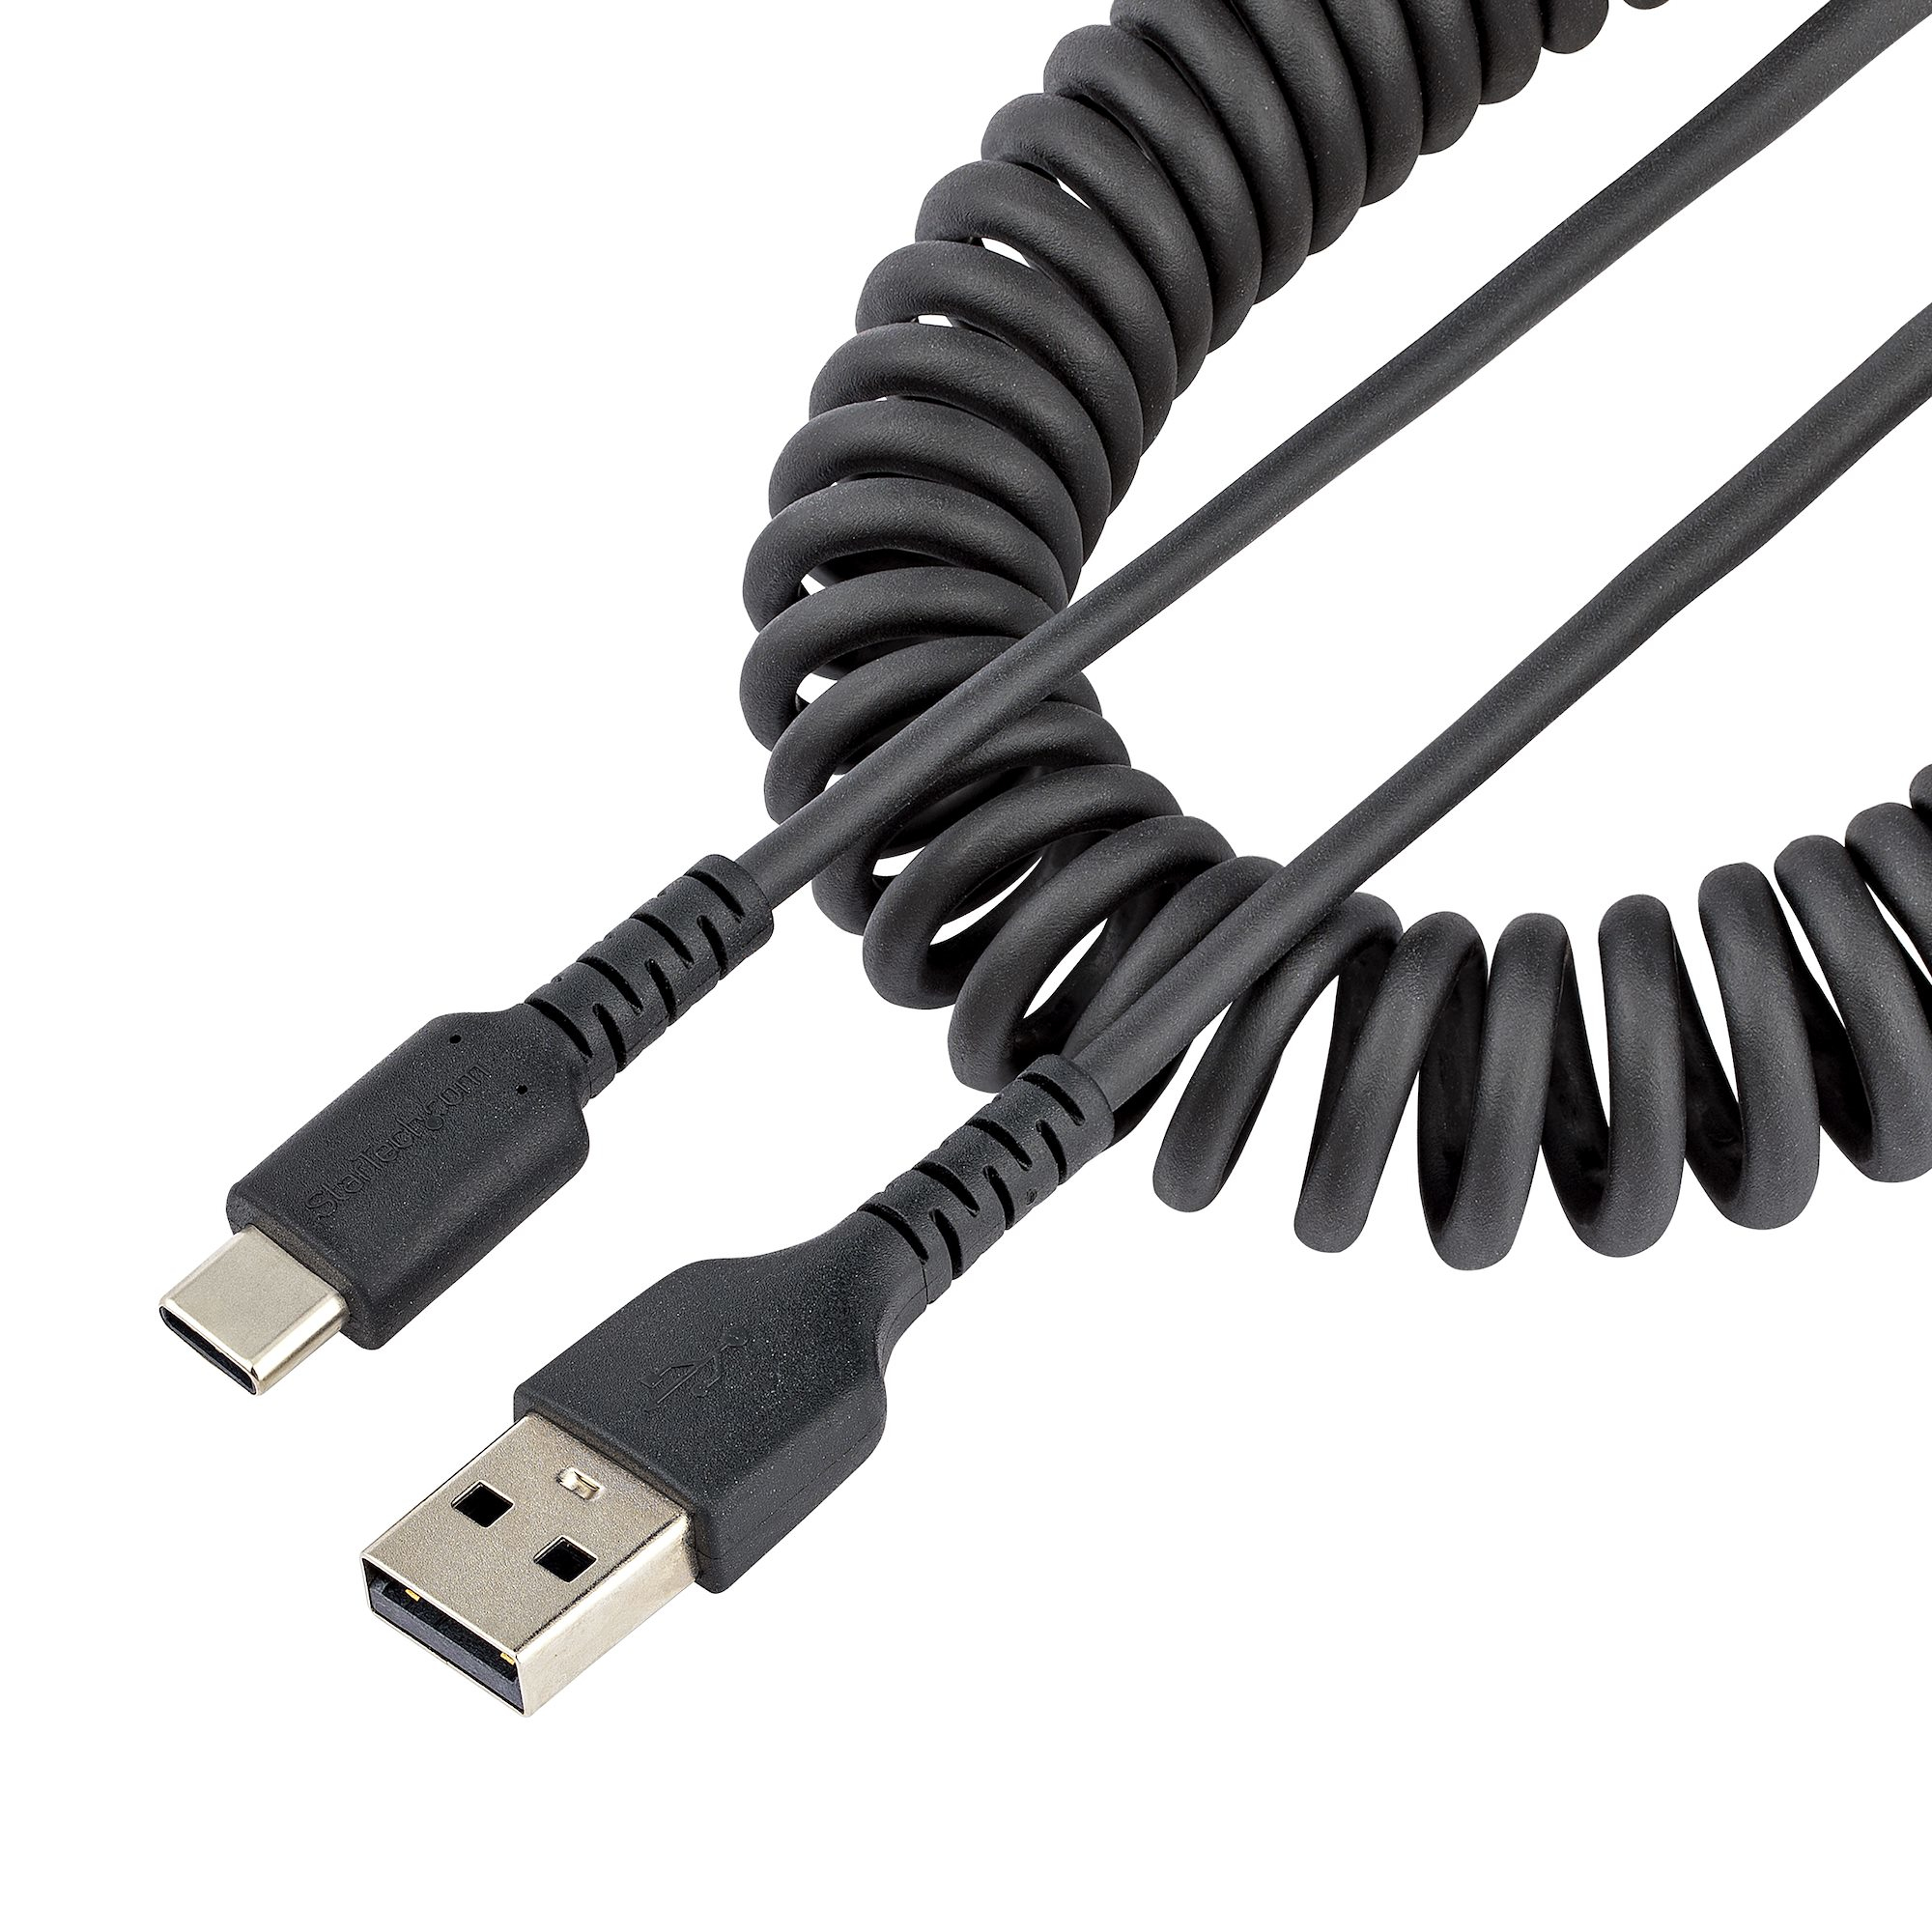 Photos - Cable (video, audio, USB) Startech.com 20in  USB A to C Charging Cable, Coiled Heavy Duty R2AC (50cm)